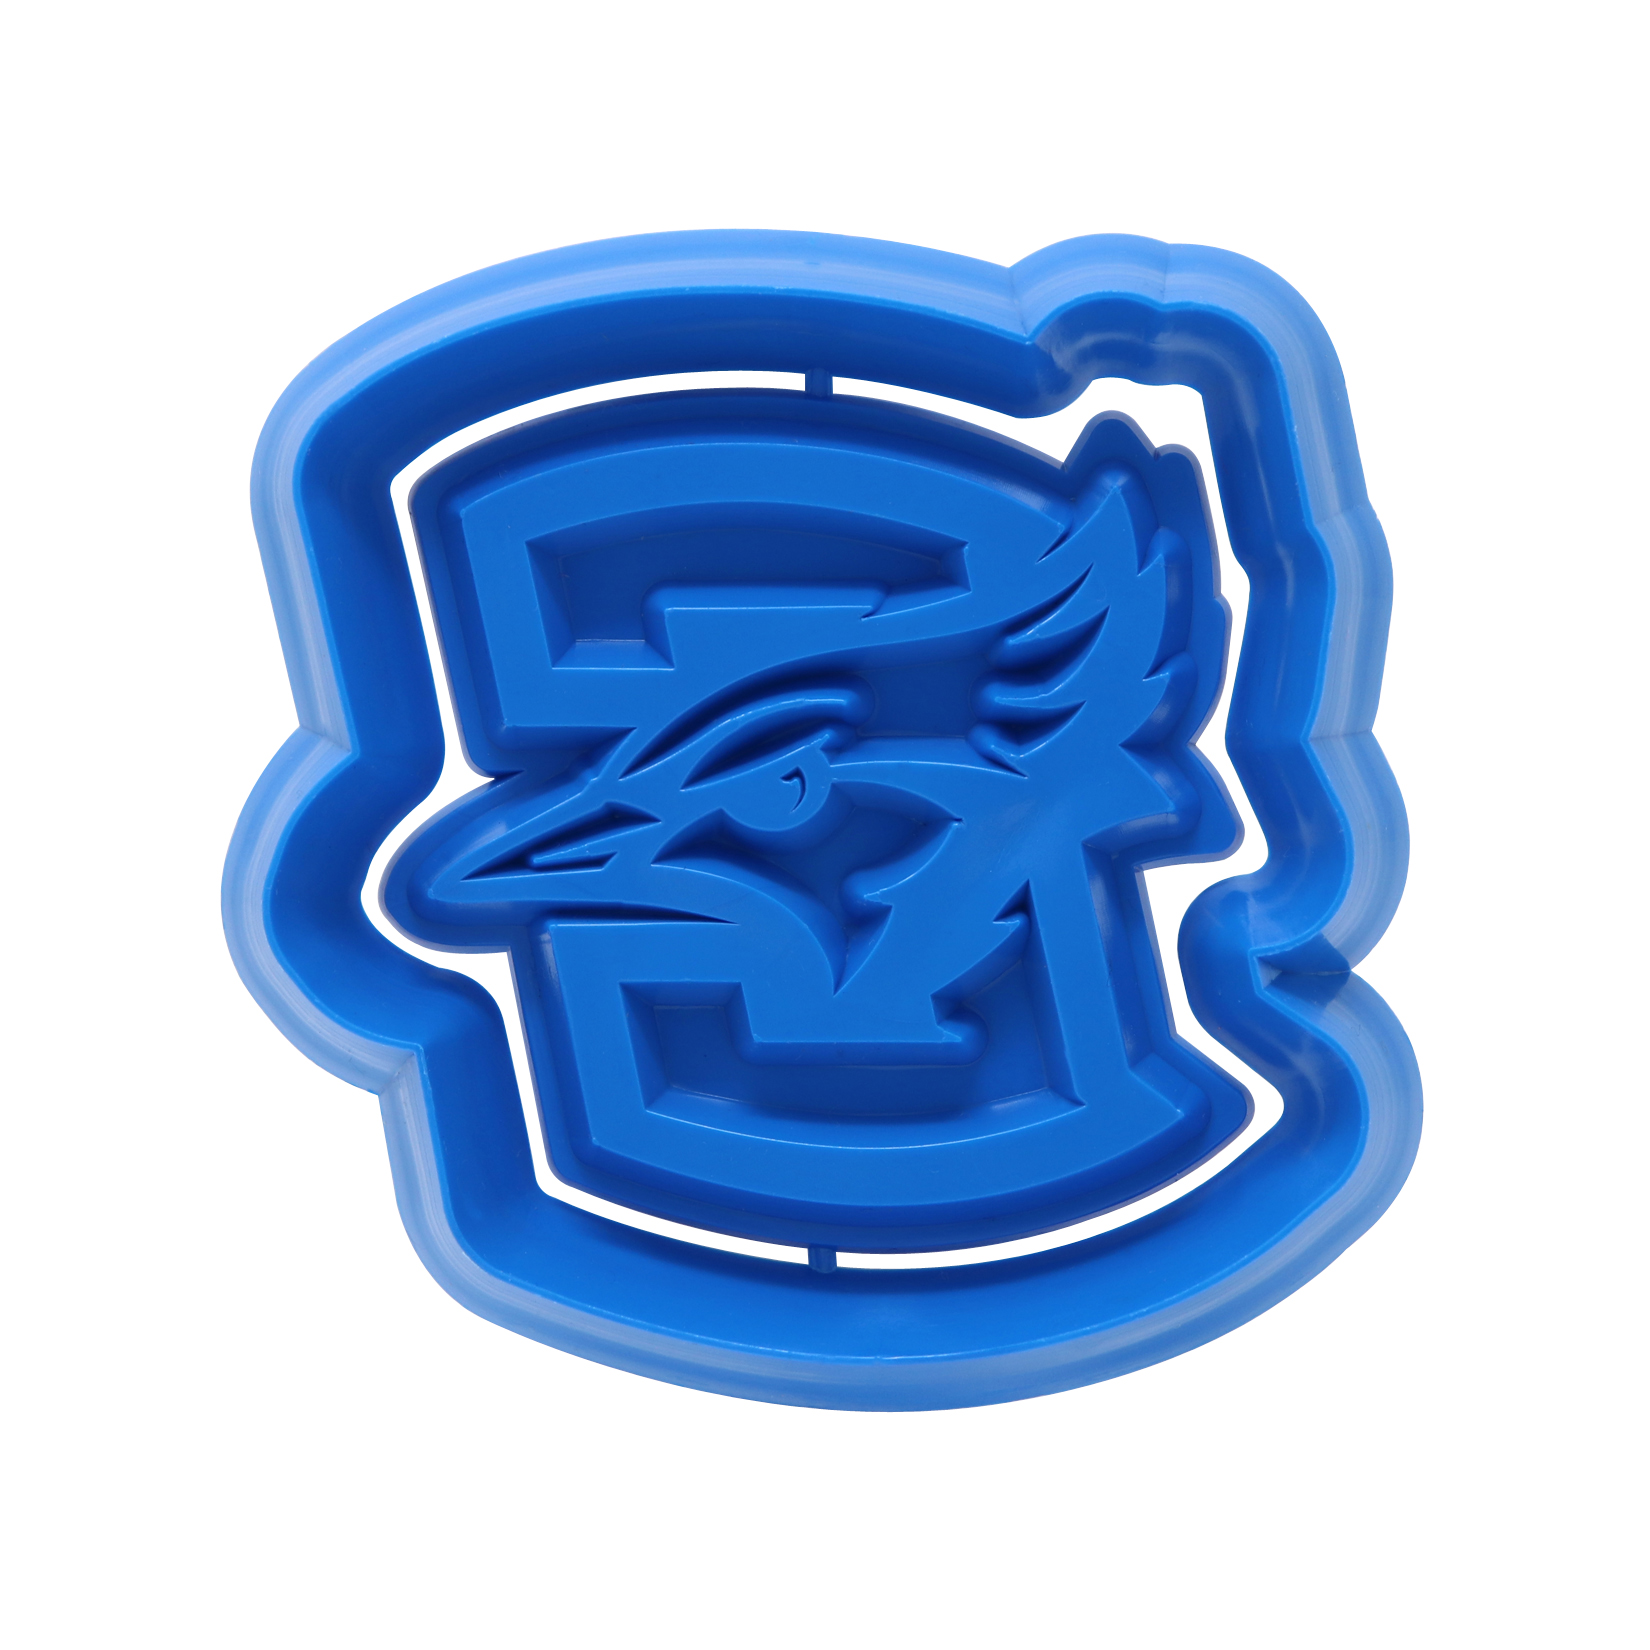 Blue blue Jay Shaped cookie cutter - press combo